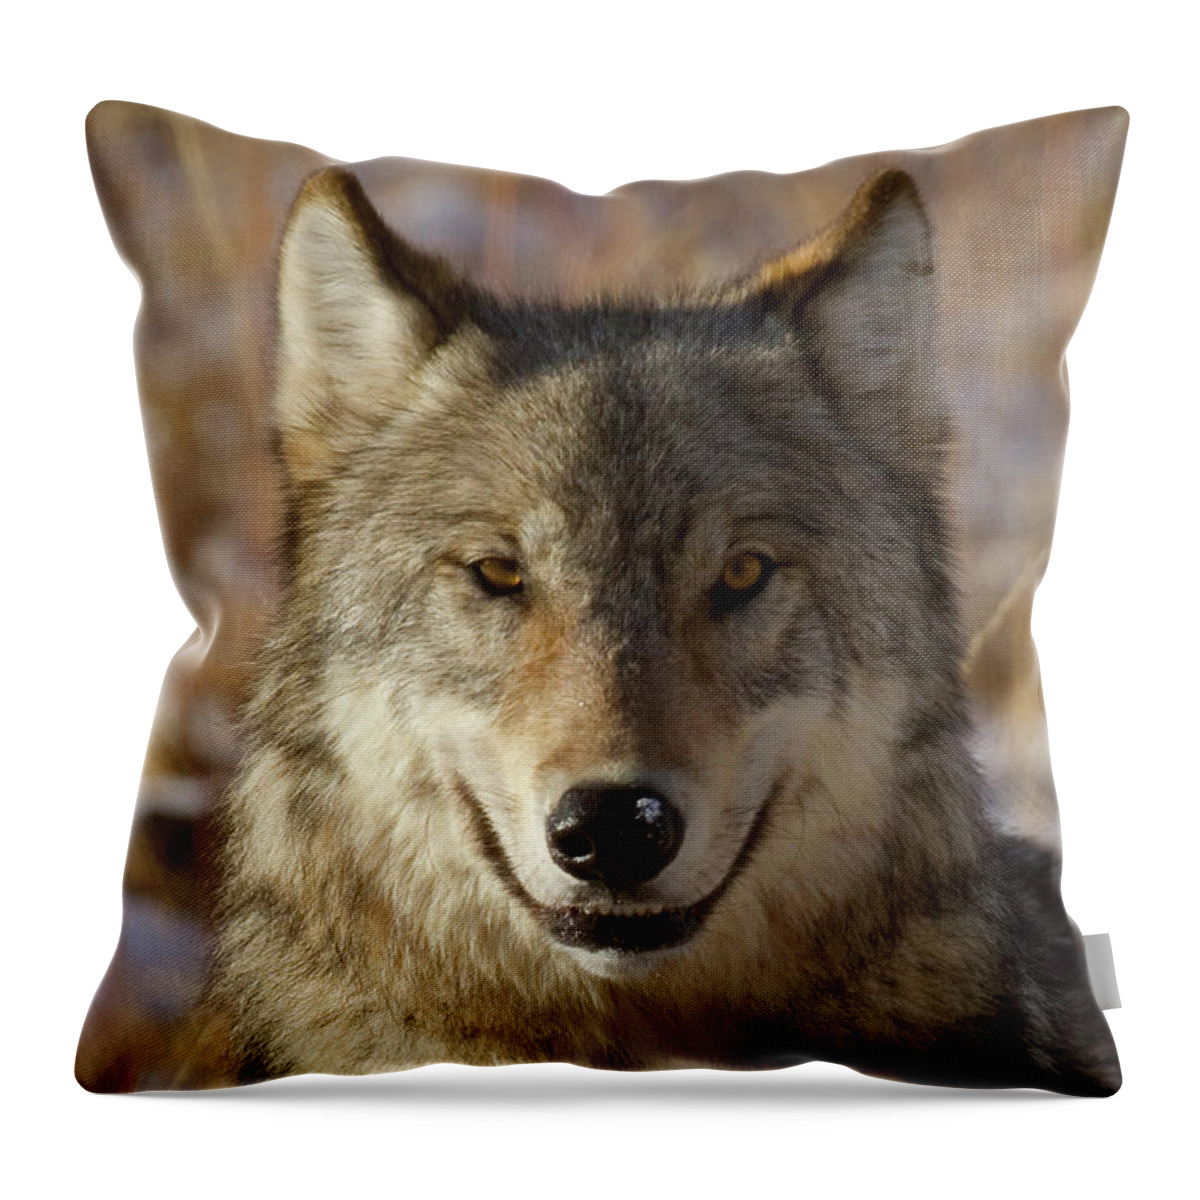 Wolf Throw Pillow featuring the photograph Wild Wolf Portrait by Mark Miller